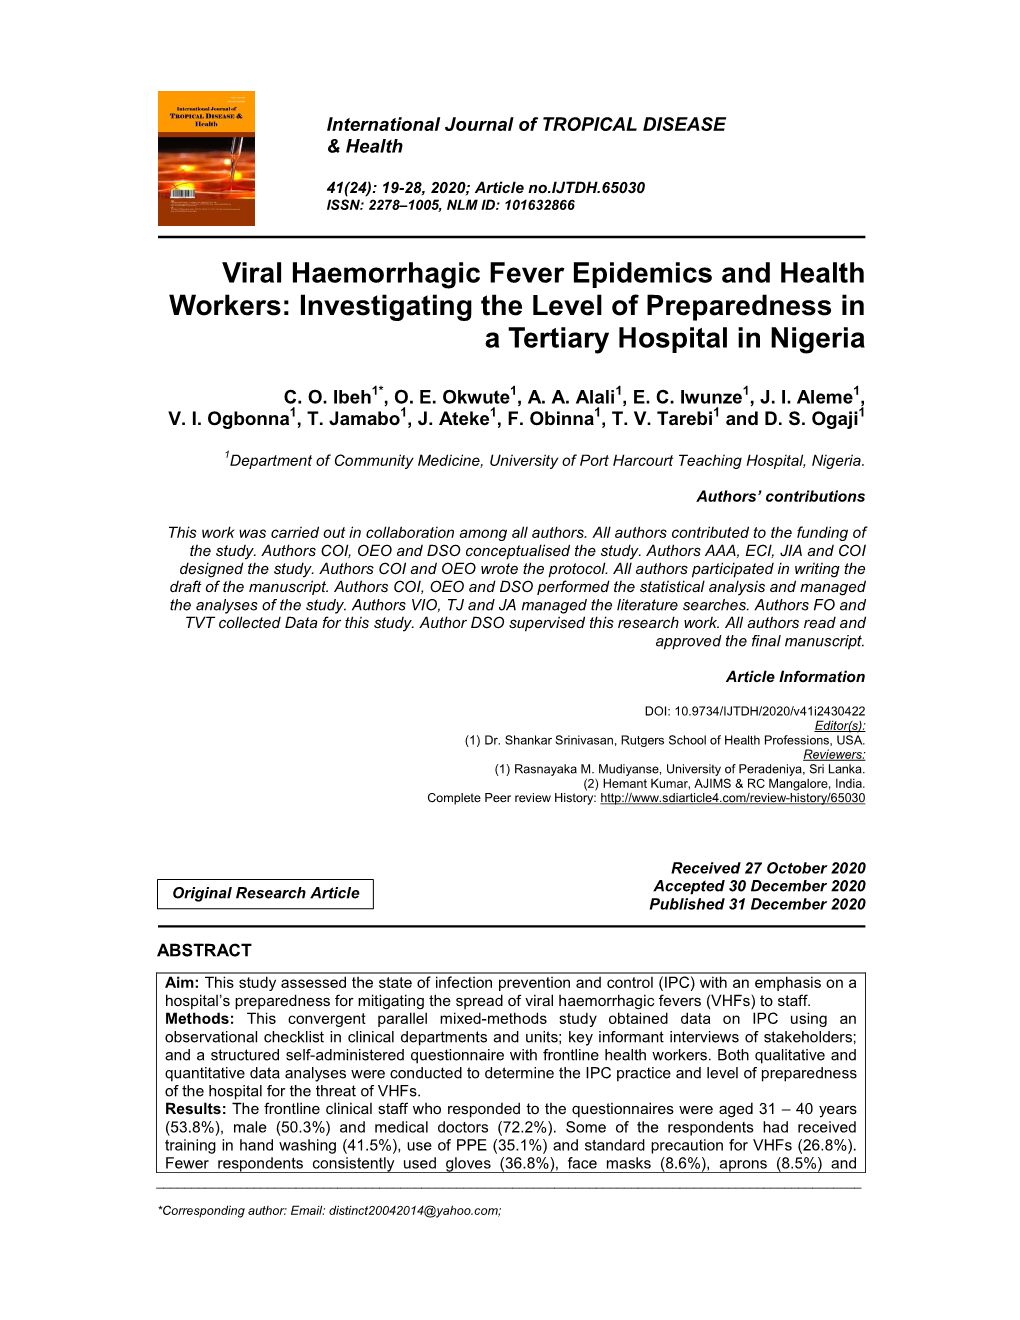 Viral Haemorrhagic Fever Epidemics and Health Workers: Investigating the Level of Preparedness in a Tertiary Hospital in Nigeria